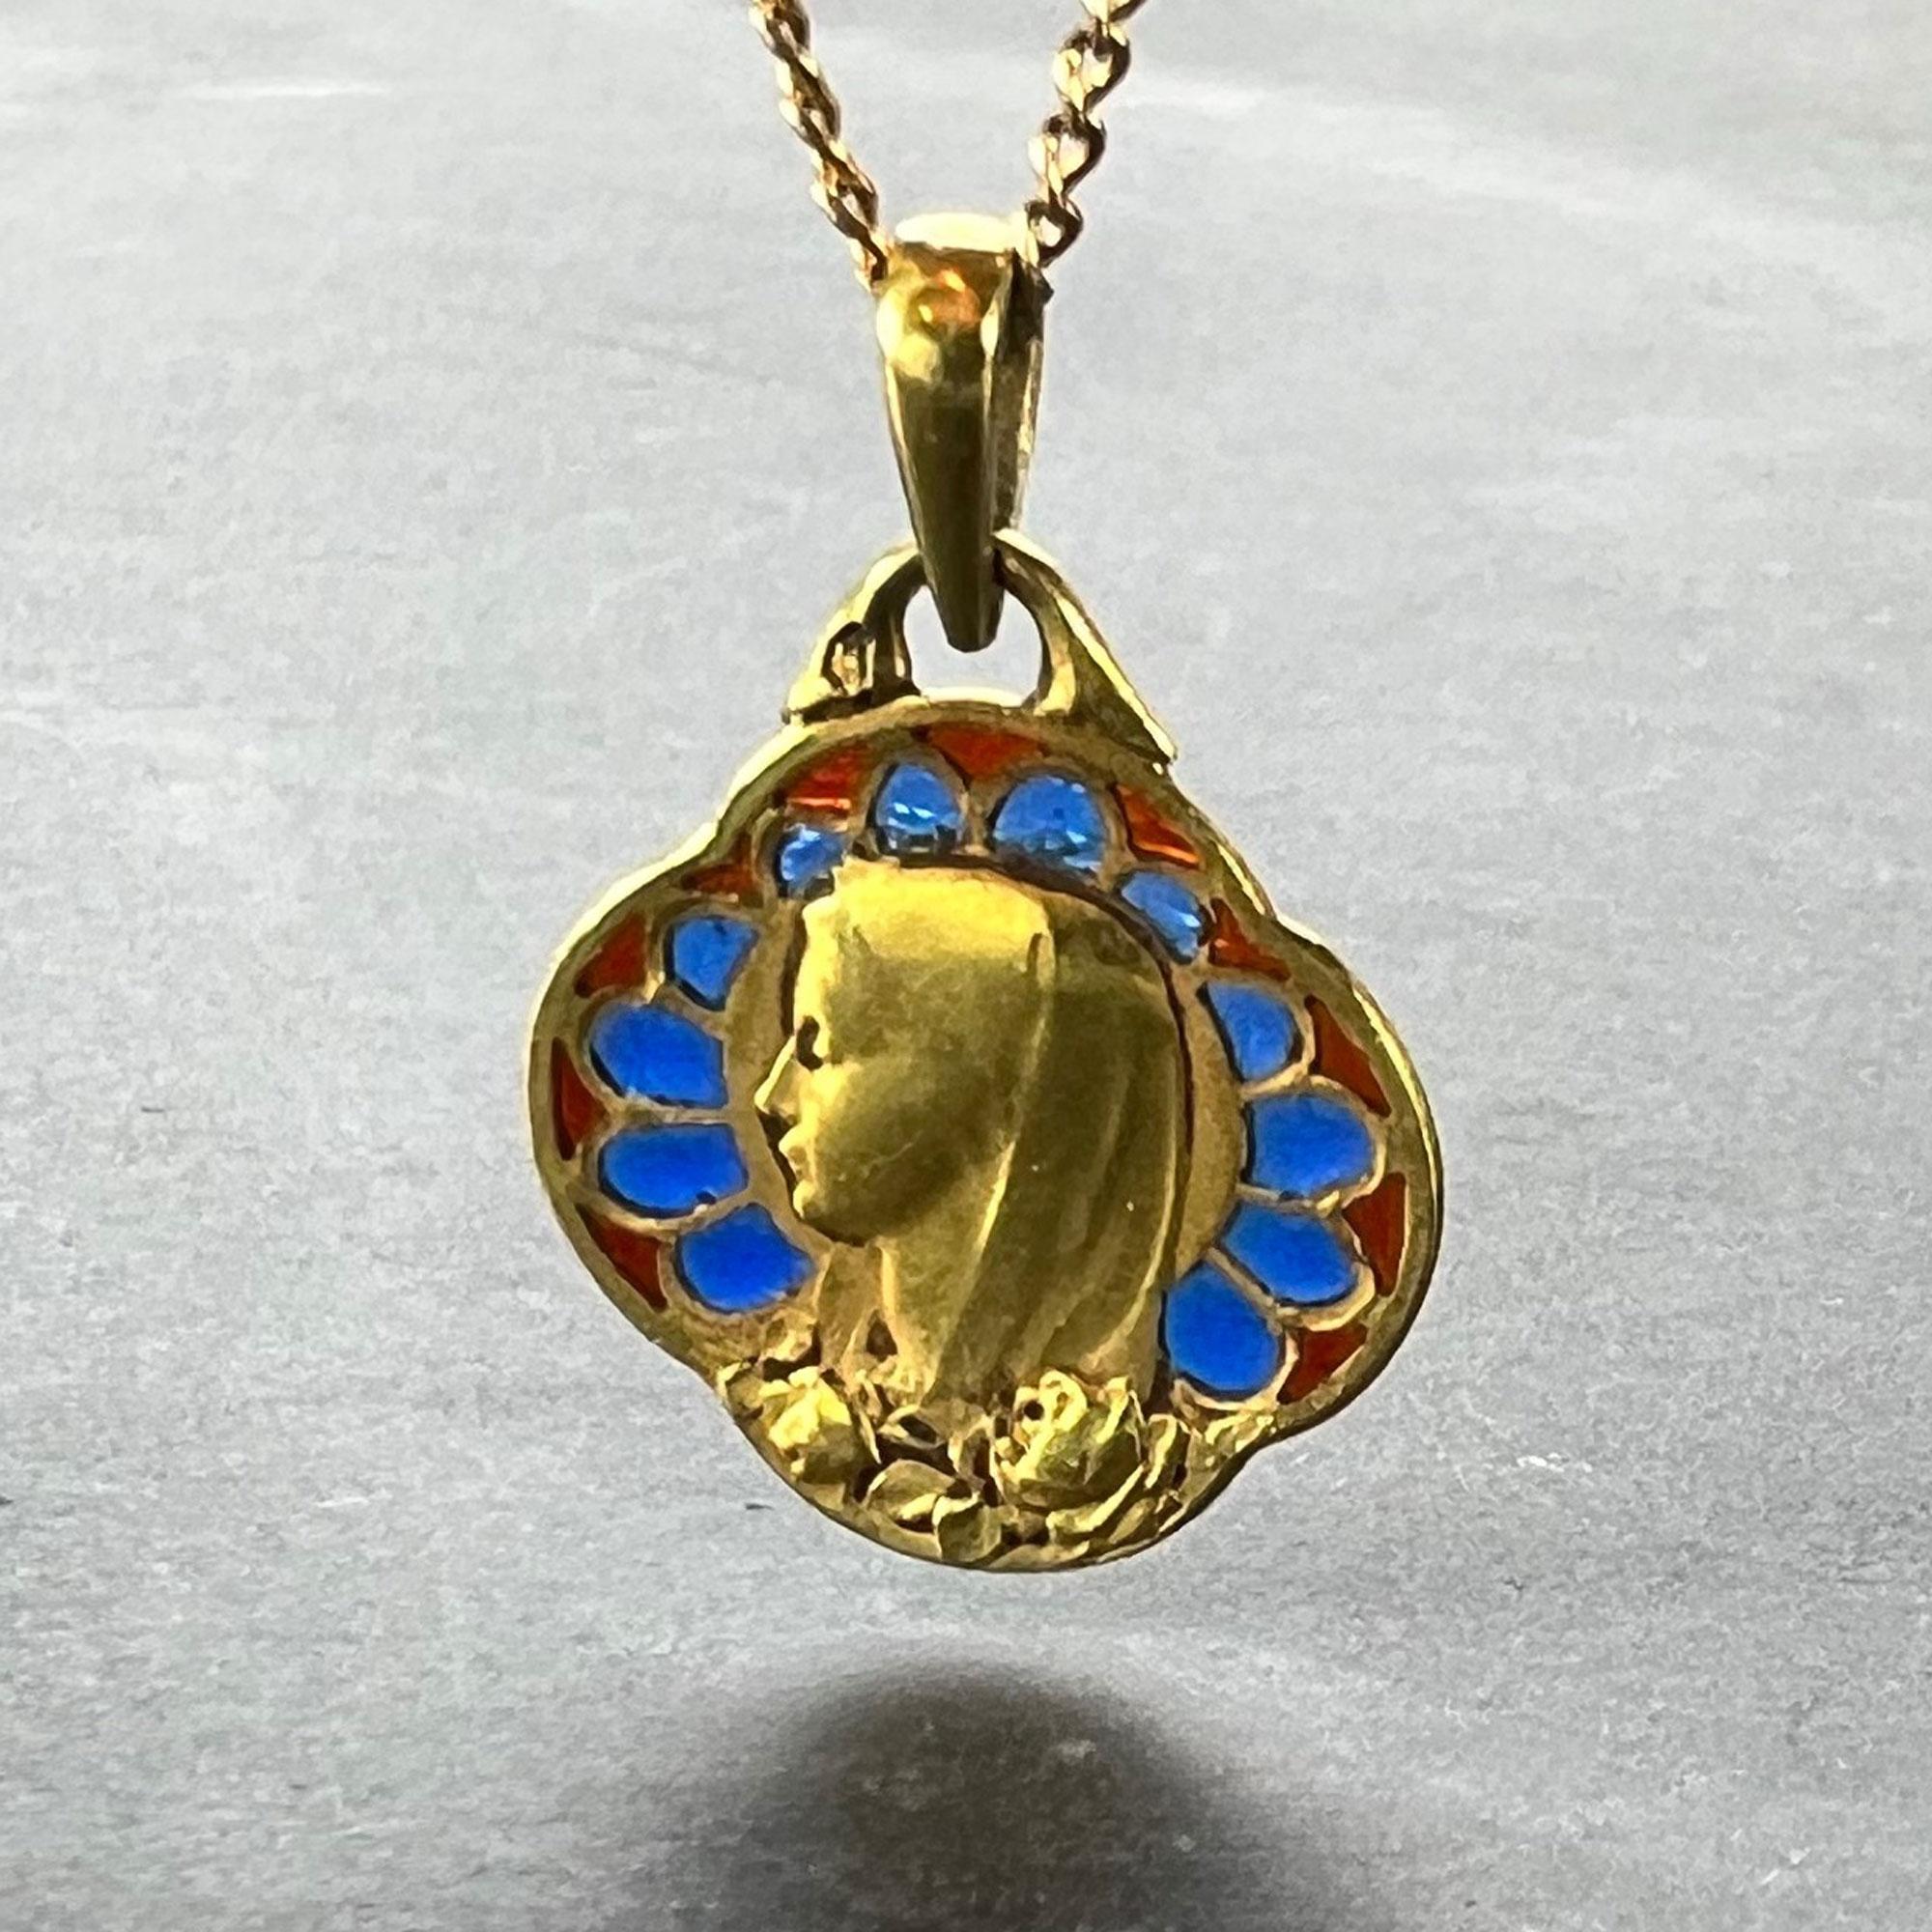 A French 18 karat (18K) yellow gold charm pendant with quatrefoil outline, set with plique a jour blue and red enamel designed as the Virgin Mary with a motif of roses. The reverse engraved with a monogram for AJ and the date 19 Juin 1932. Stamped